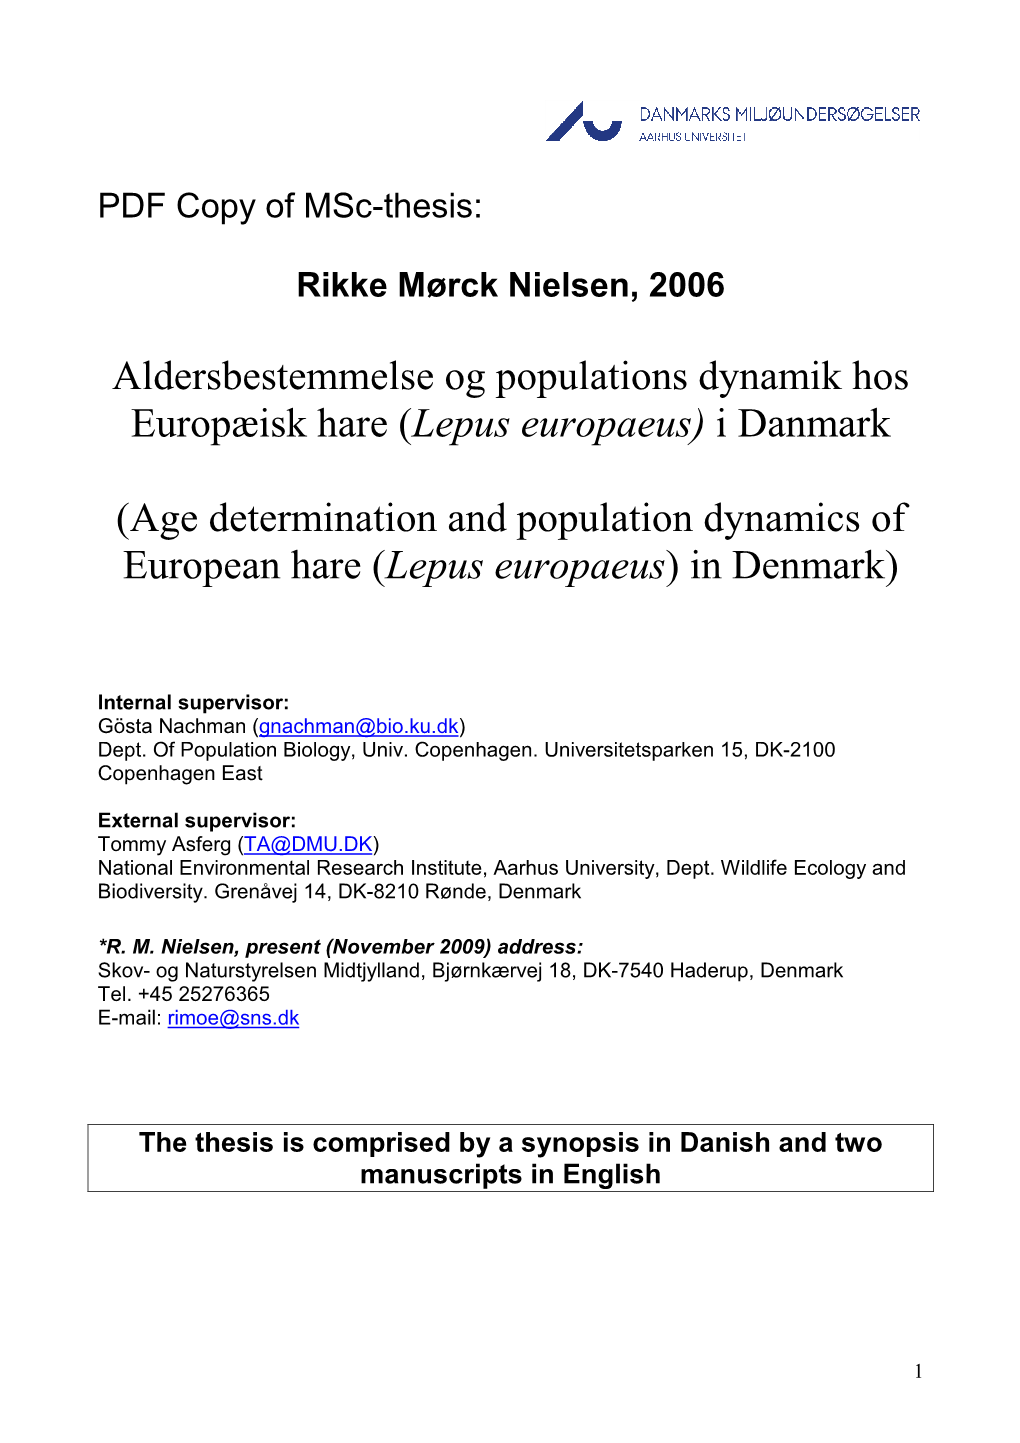 Nielsen 2006 Msc Thesis Age Determination and Population